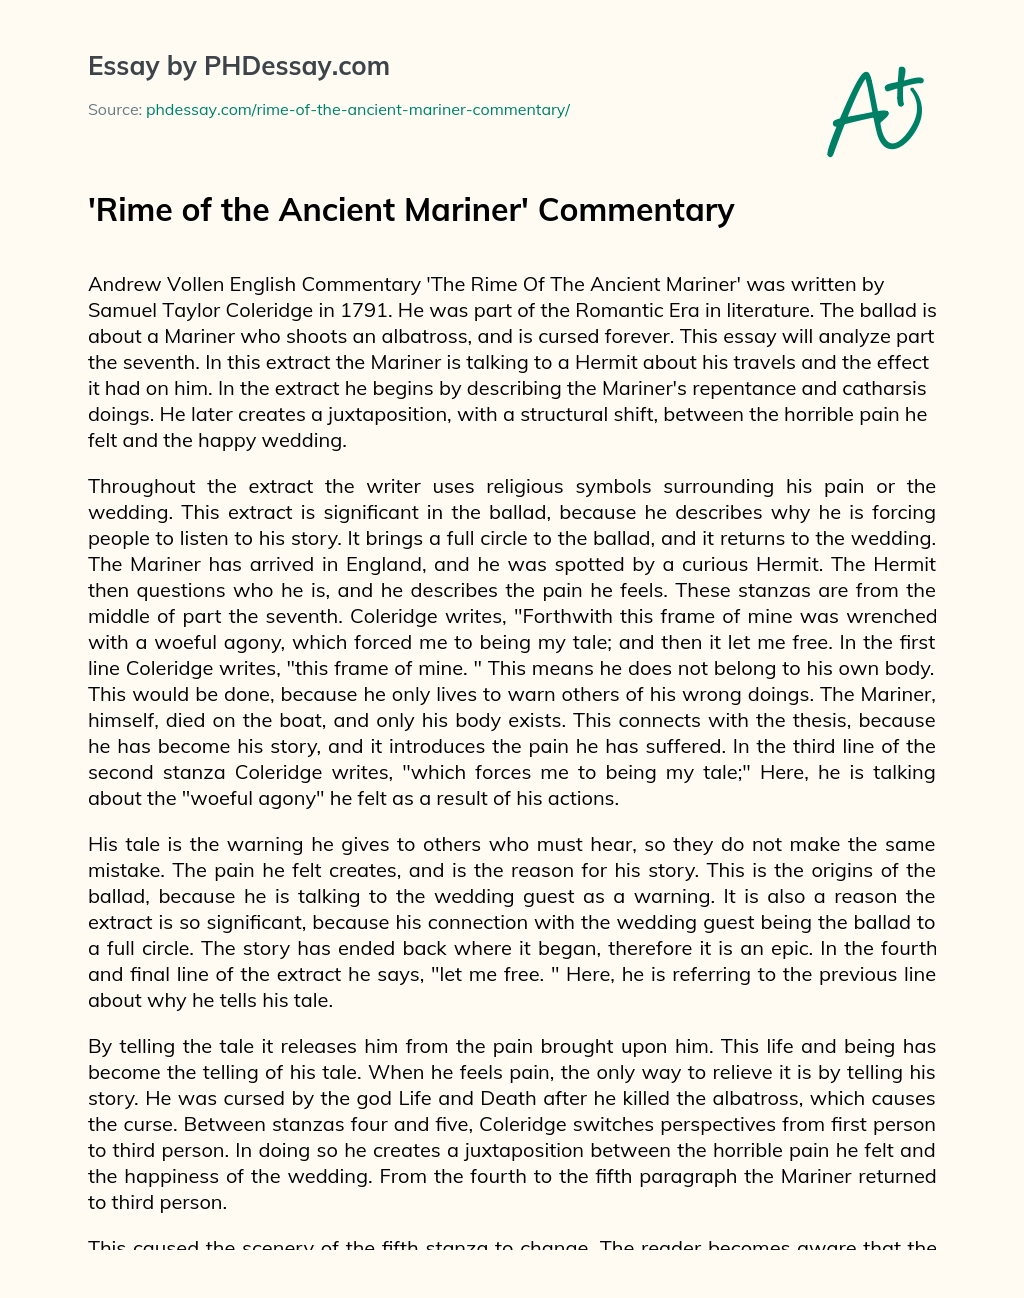 Rime of the Ancient Mariner Commentary essay